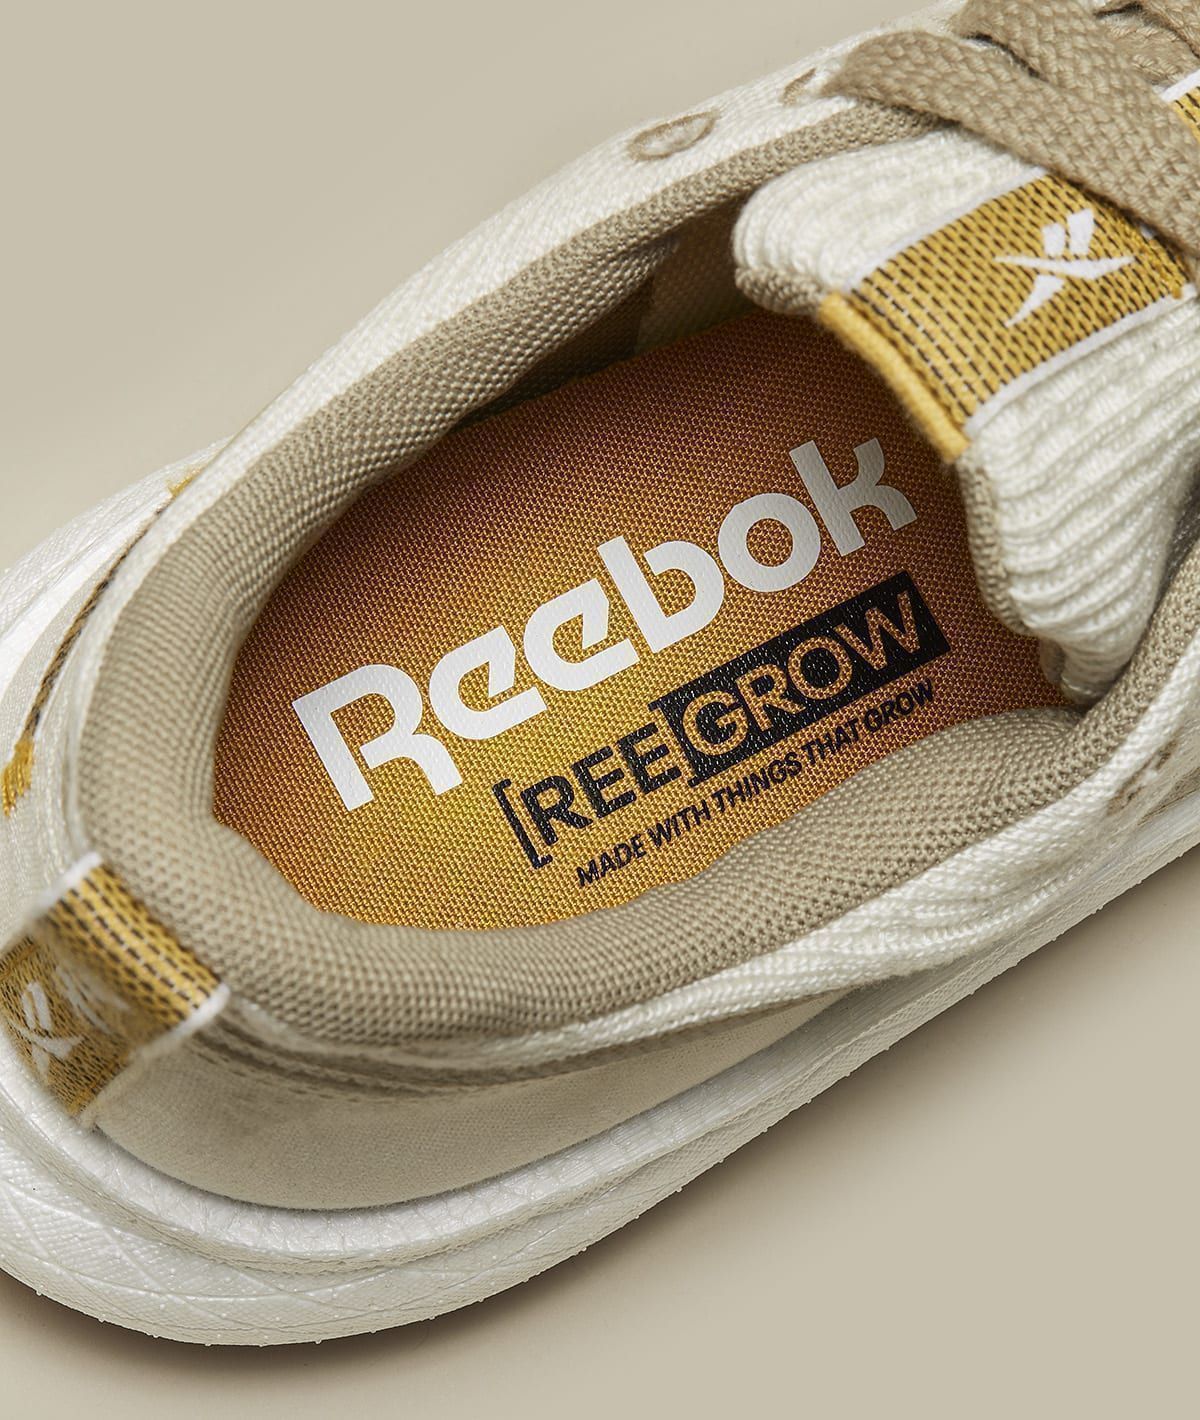 American Authentic Brands Group completes acquisition of Reebok